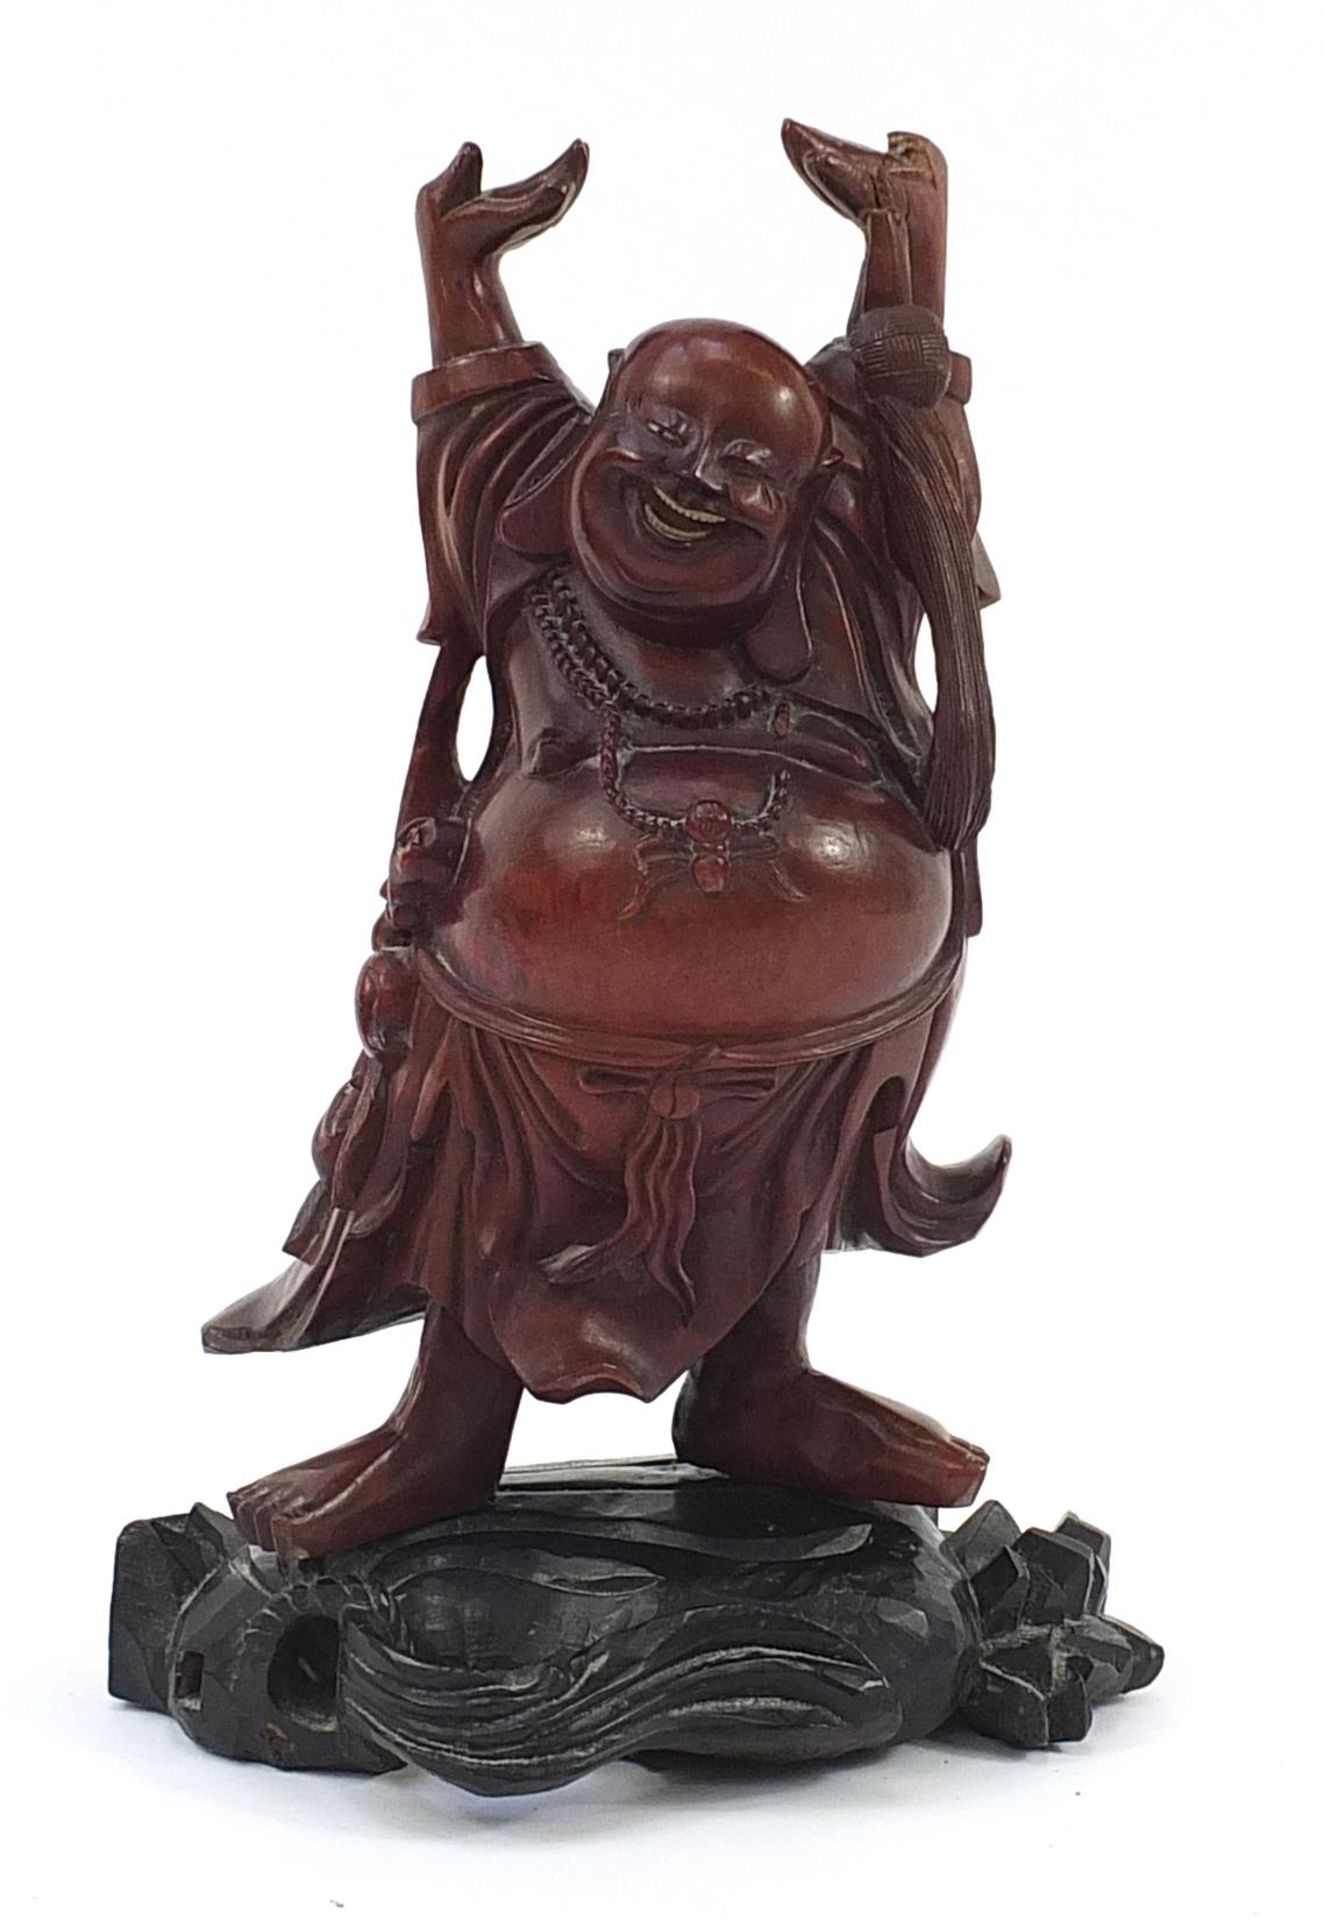 Large Chinese carved hardwood figure of Happy Buddha on stand, 40cm high